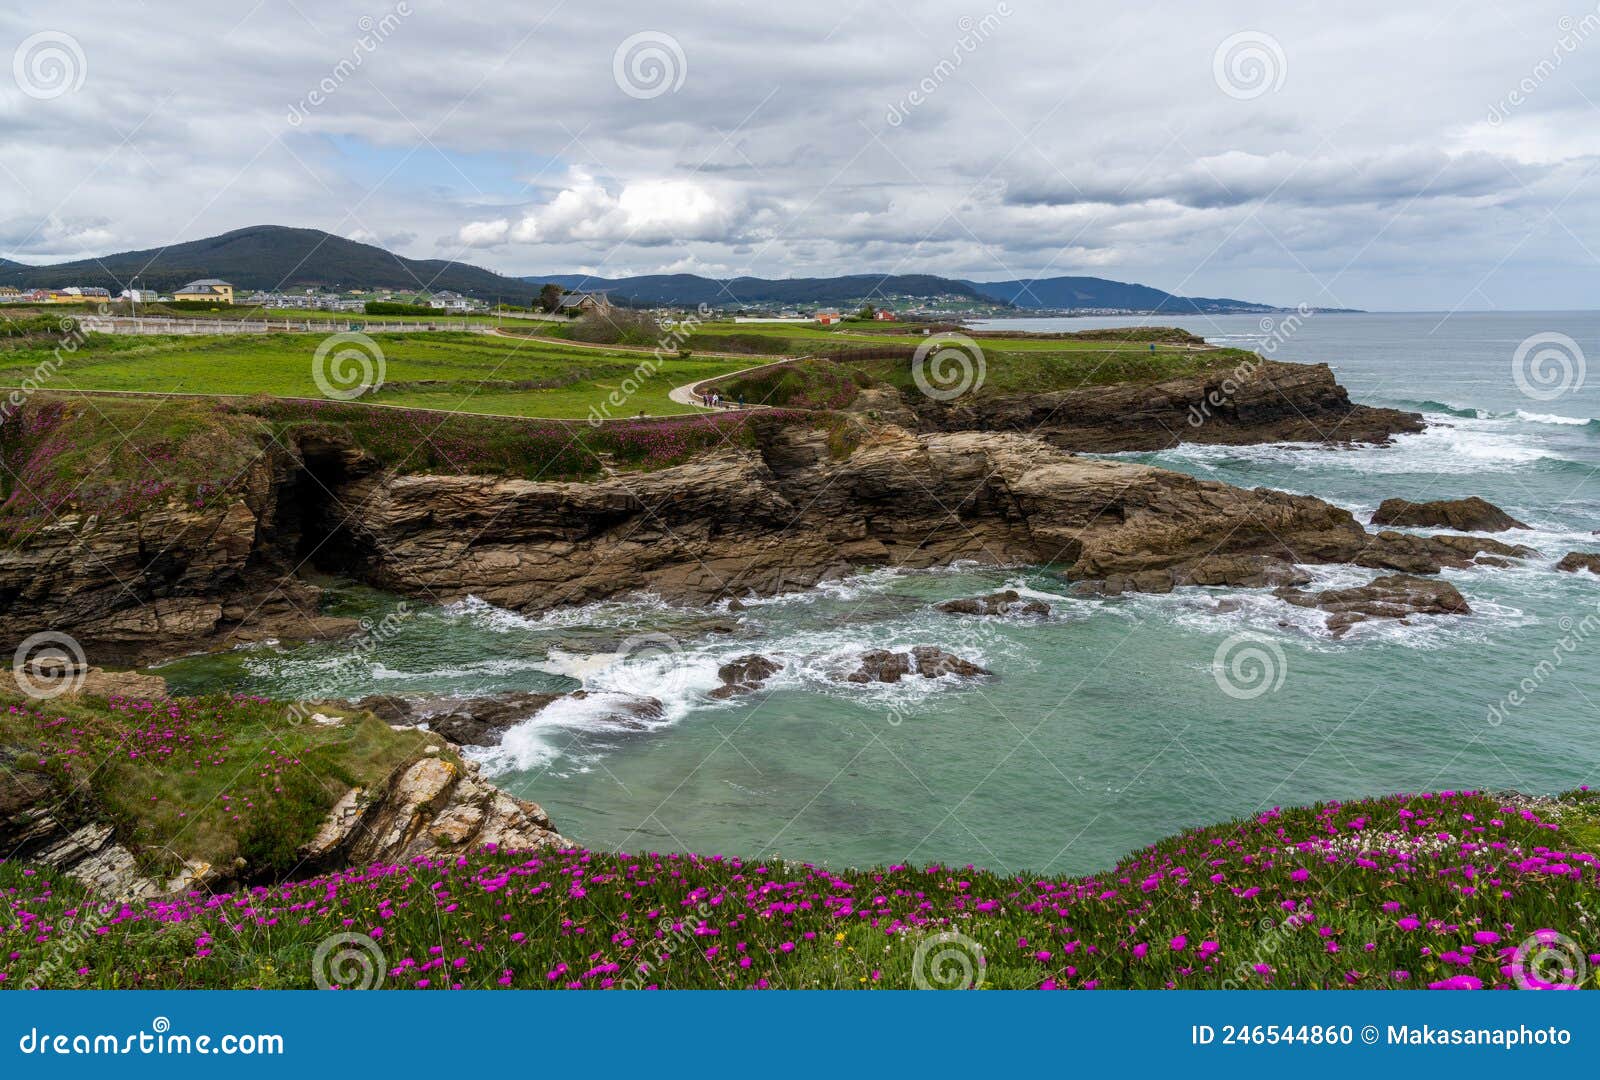 idyllic rocky cove with blossoming flowers on the coast of galicia with homes on the seashore